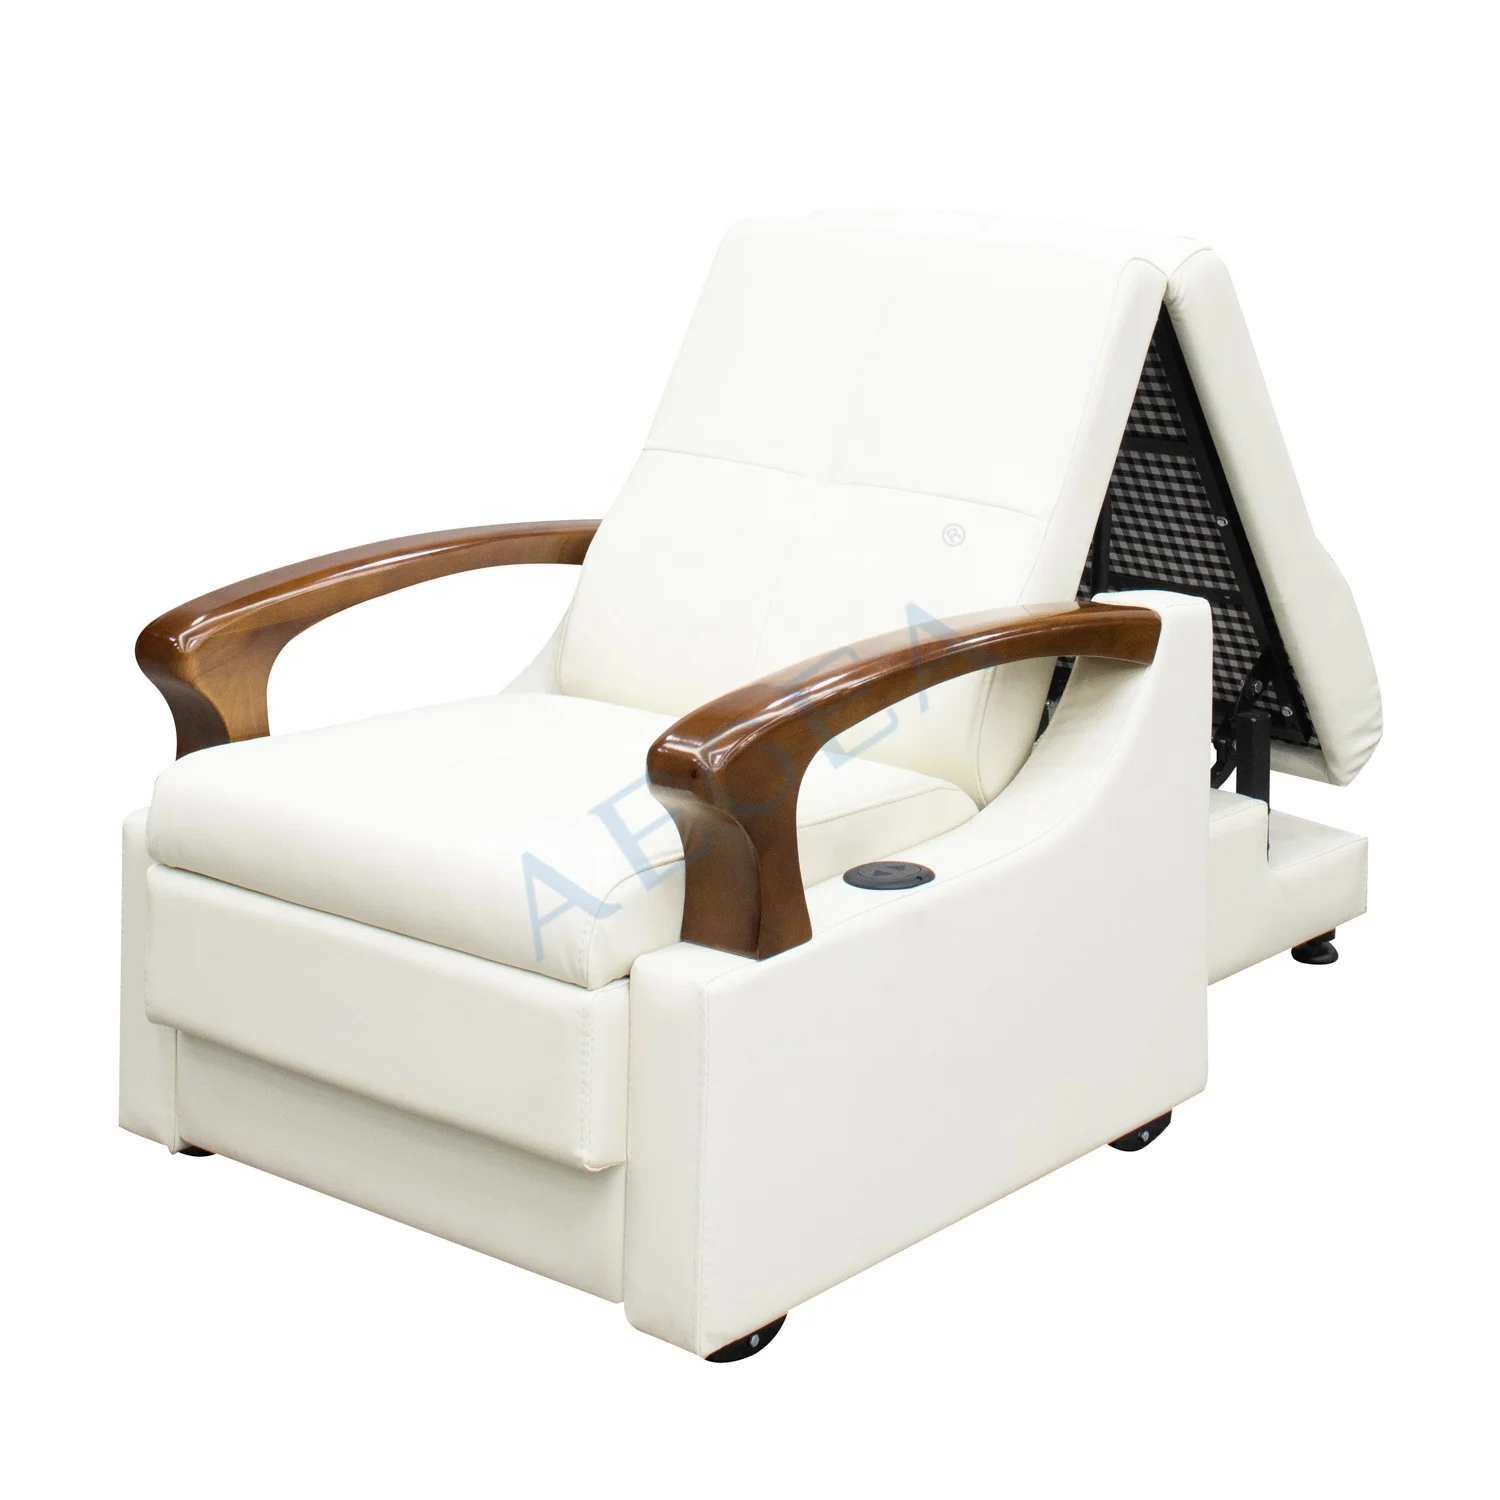 Ag Ac013 Medical Patient Room Electric Hospital Accompany Chair Bed Buy Hospital Accompany Chair Bed